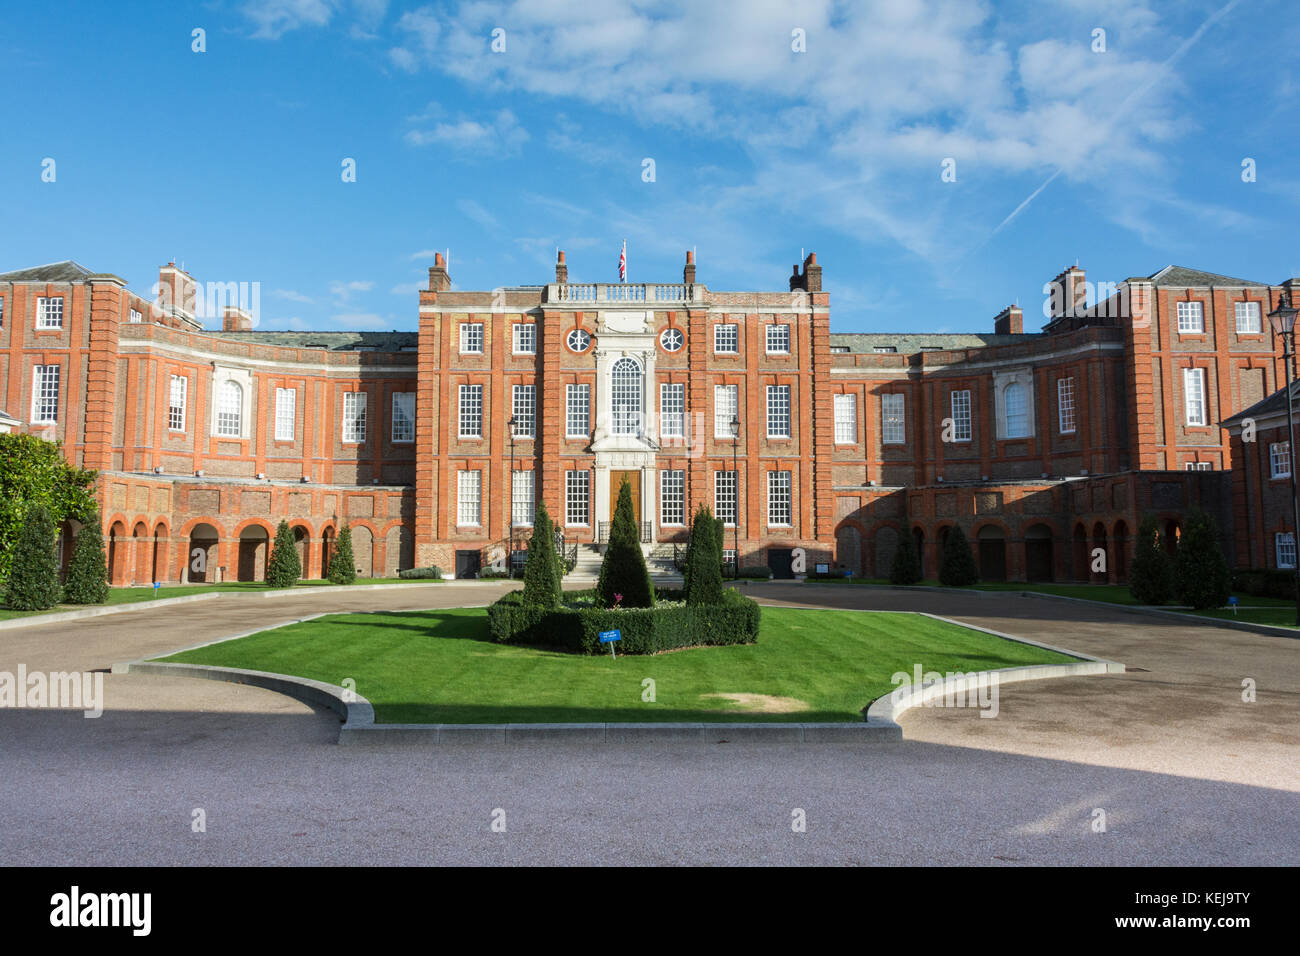 Roehampton House, part of Queen Mary’s Place, Roehampton Lane, Roehampton, London, England, UK Stock Photo